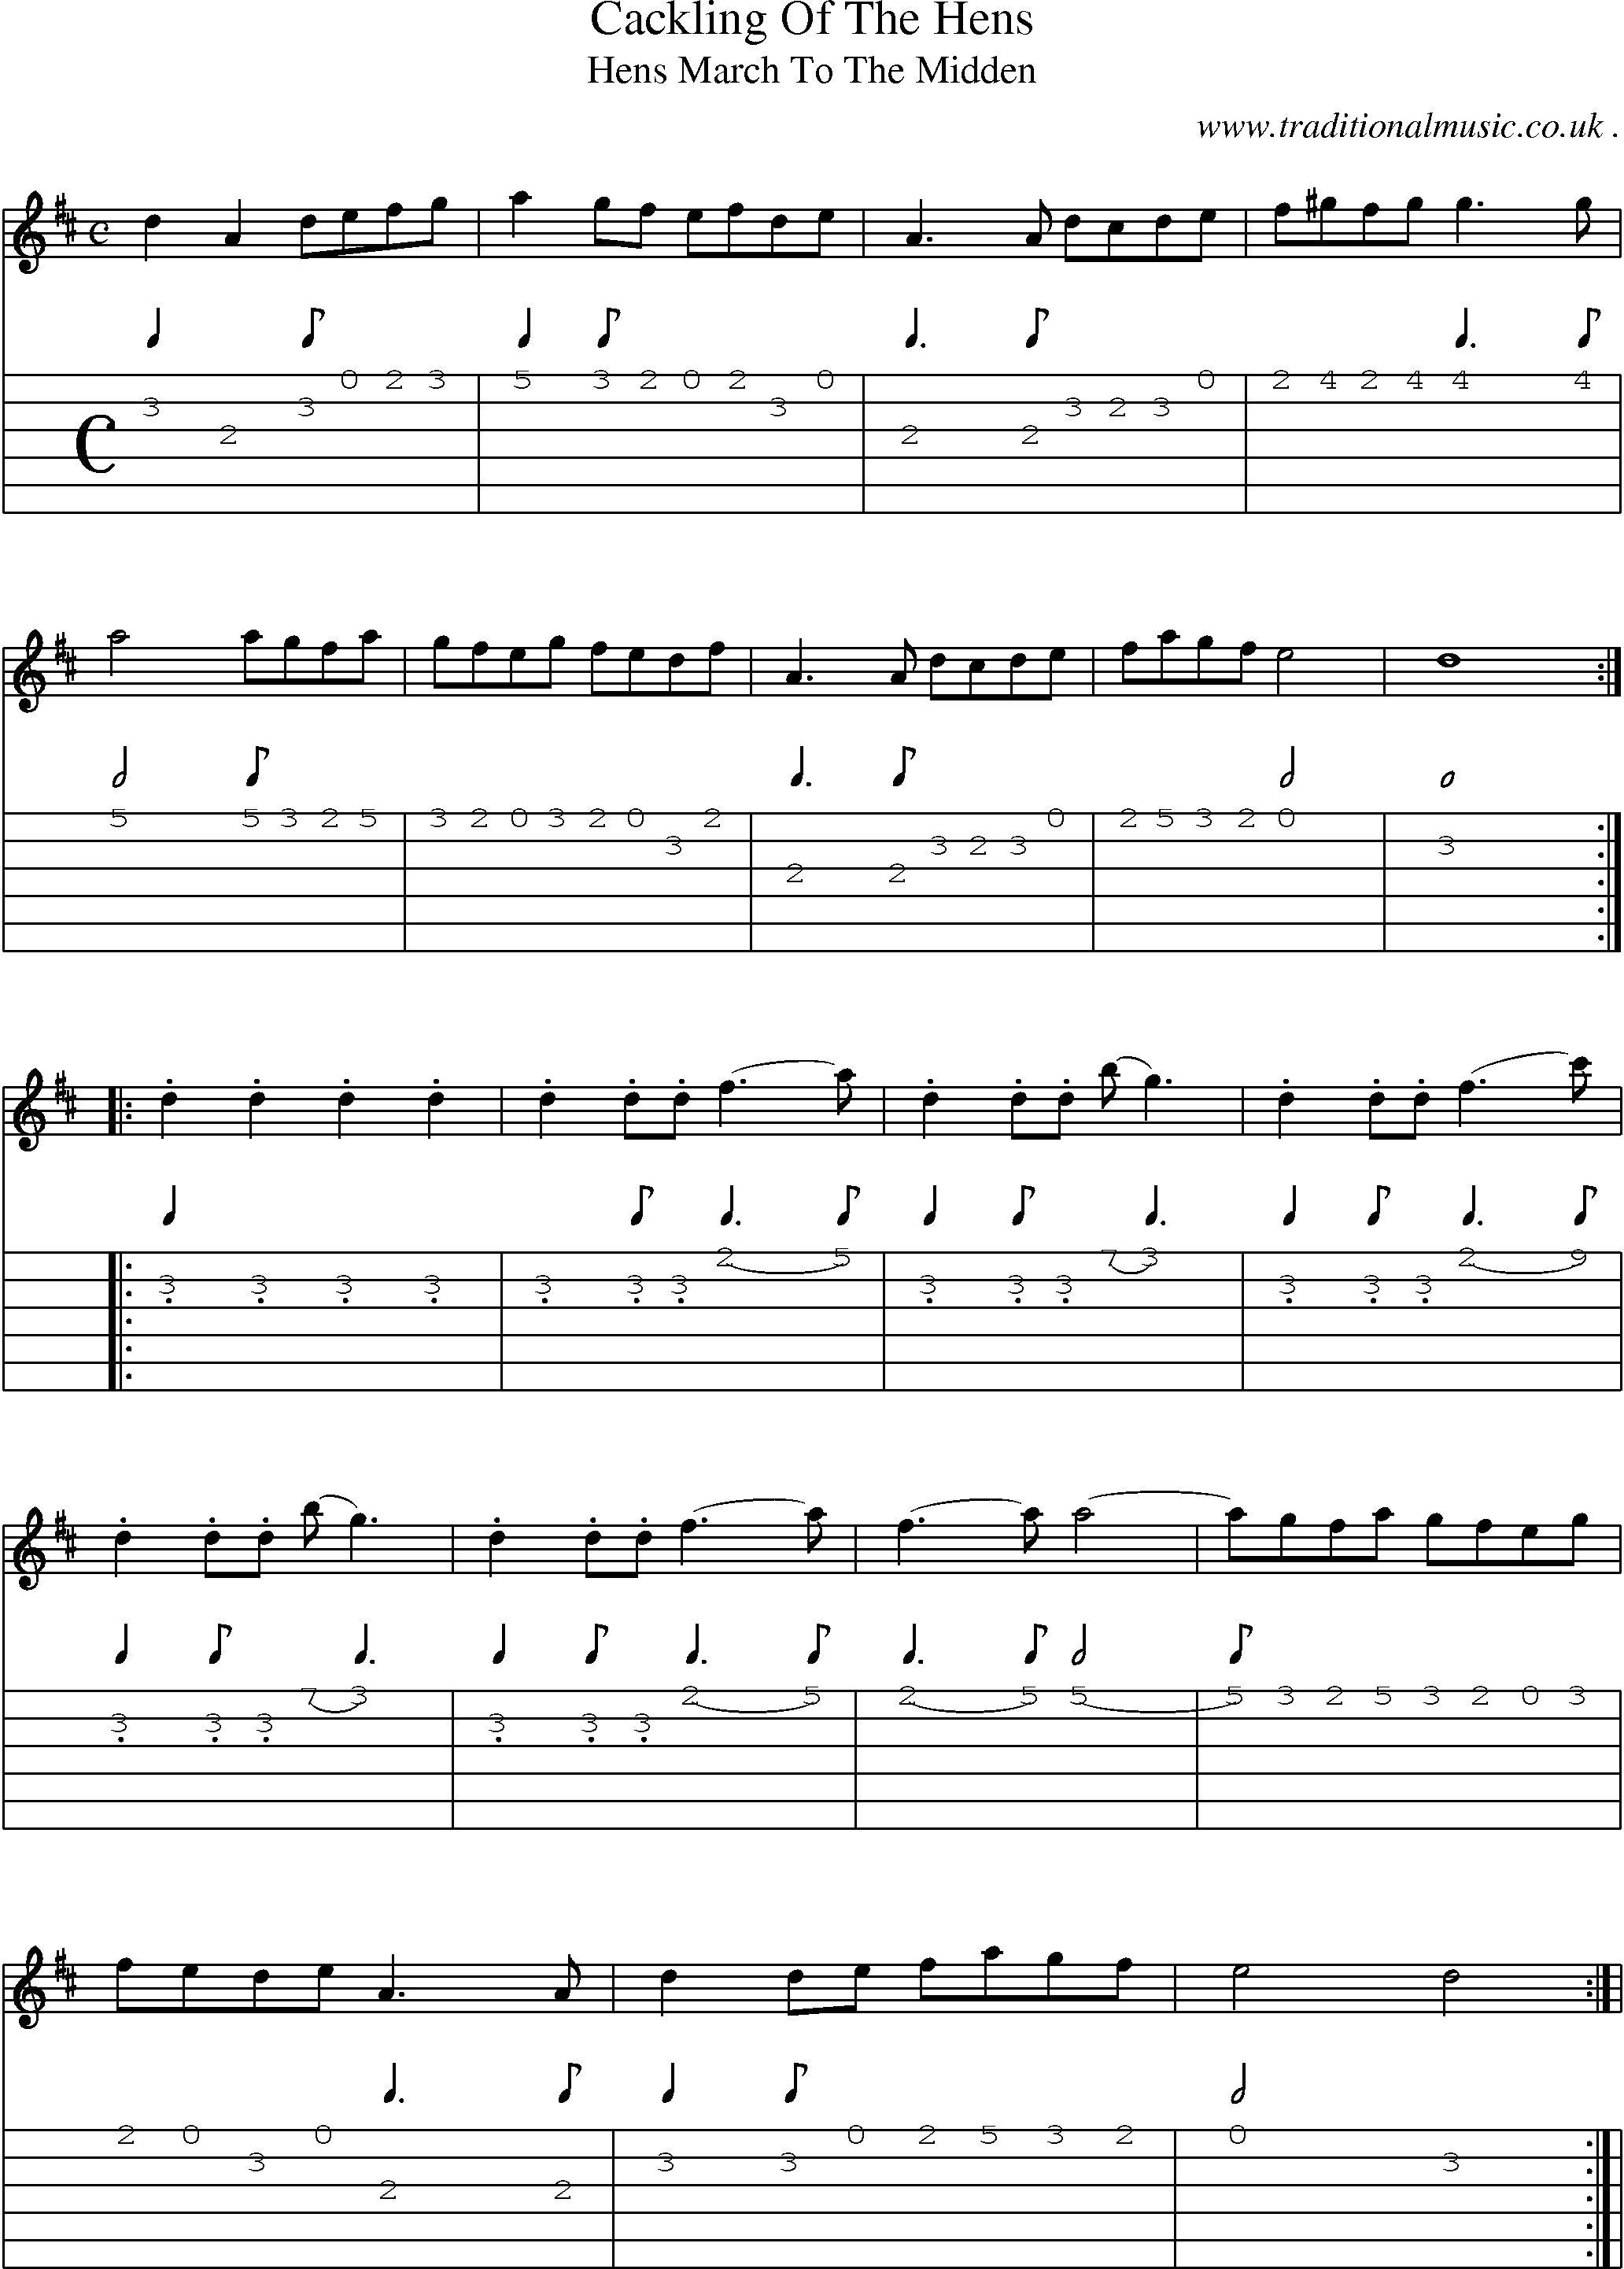 Sheet-Music and Guitar Tabs for Cackling Of The Hens